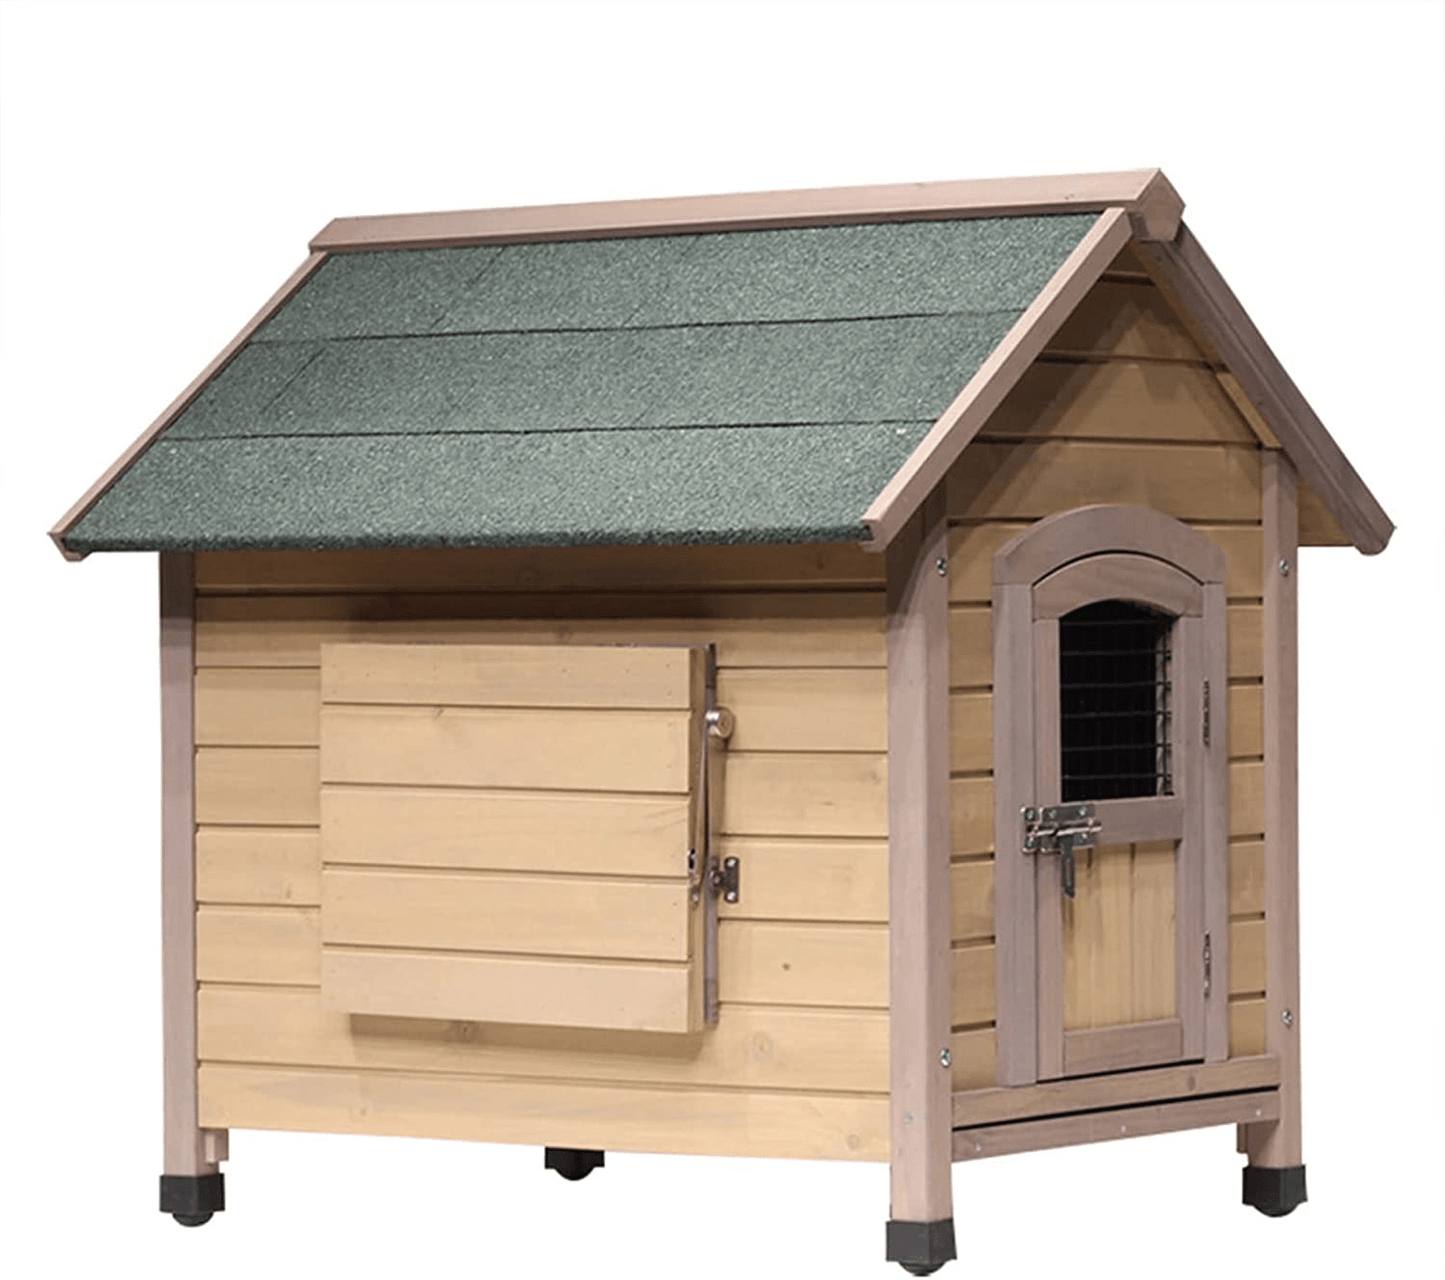 XLYYLM Small Medium and Large Kennels Are Weatherproof Indoor and Outdoor Dog House with Door Pet House Outdoor Weatherproof and Cold-Proof Pet House Shelter Kennel Raised Floor Wooden Dog House Animals & Pet Supplies > Pet Supplies > Dog Supplies > Dog Houses XLYYLM   